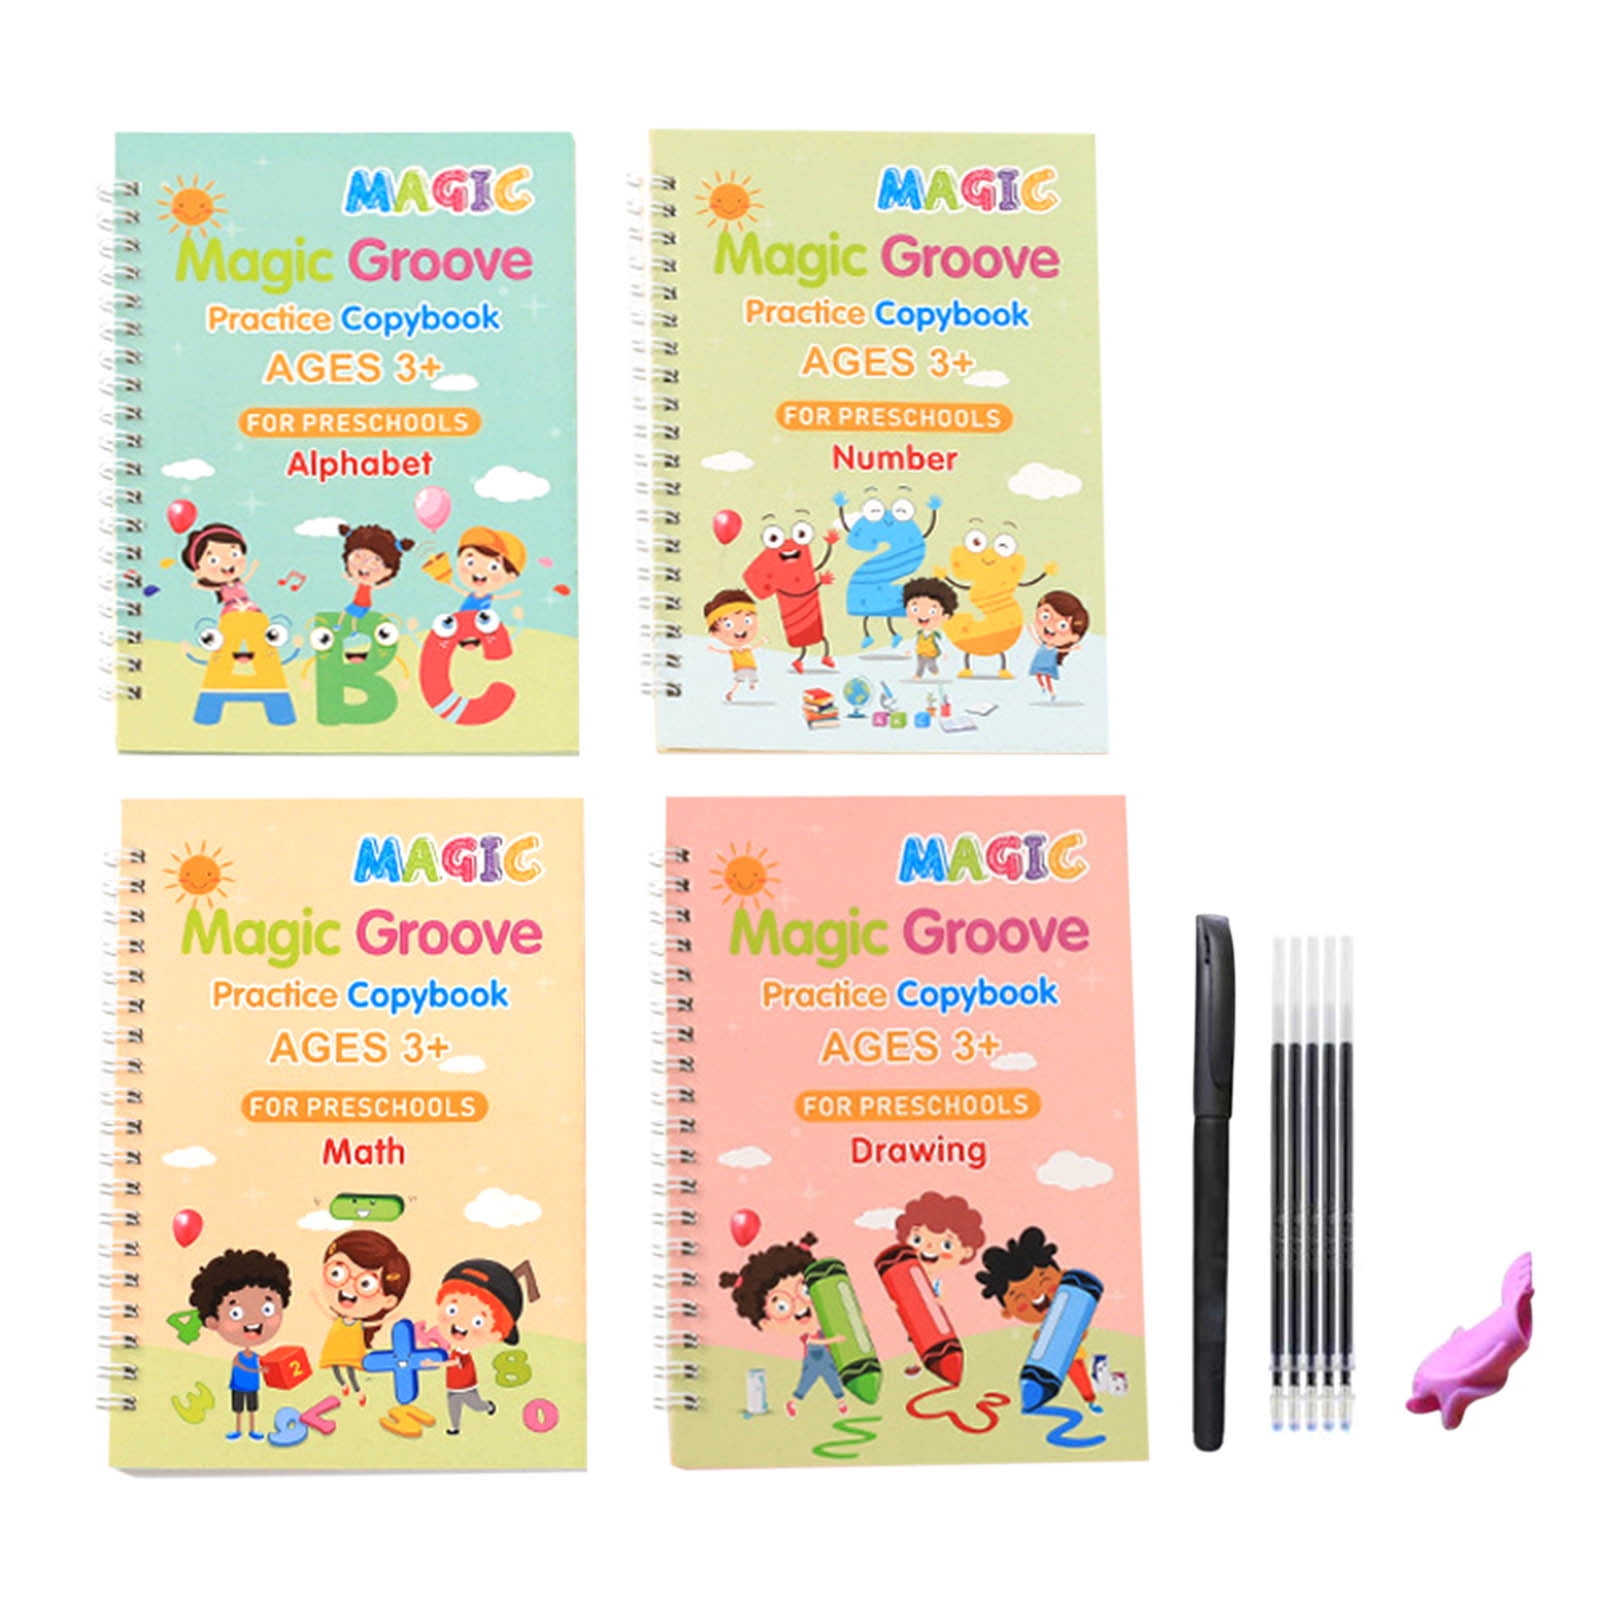  Handwriting Practice for Kids, Magic Practice Copybook, 3D Groove  Calligraphy Copybook,chinese Reusable Groove Calligraphy Copybook for  Children Students Practice Exercise